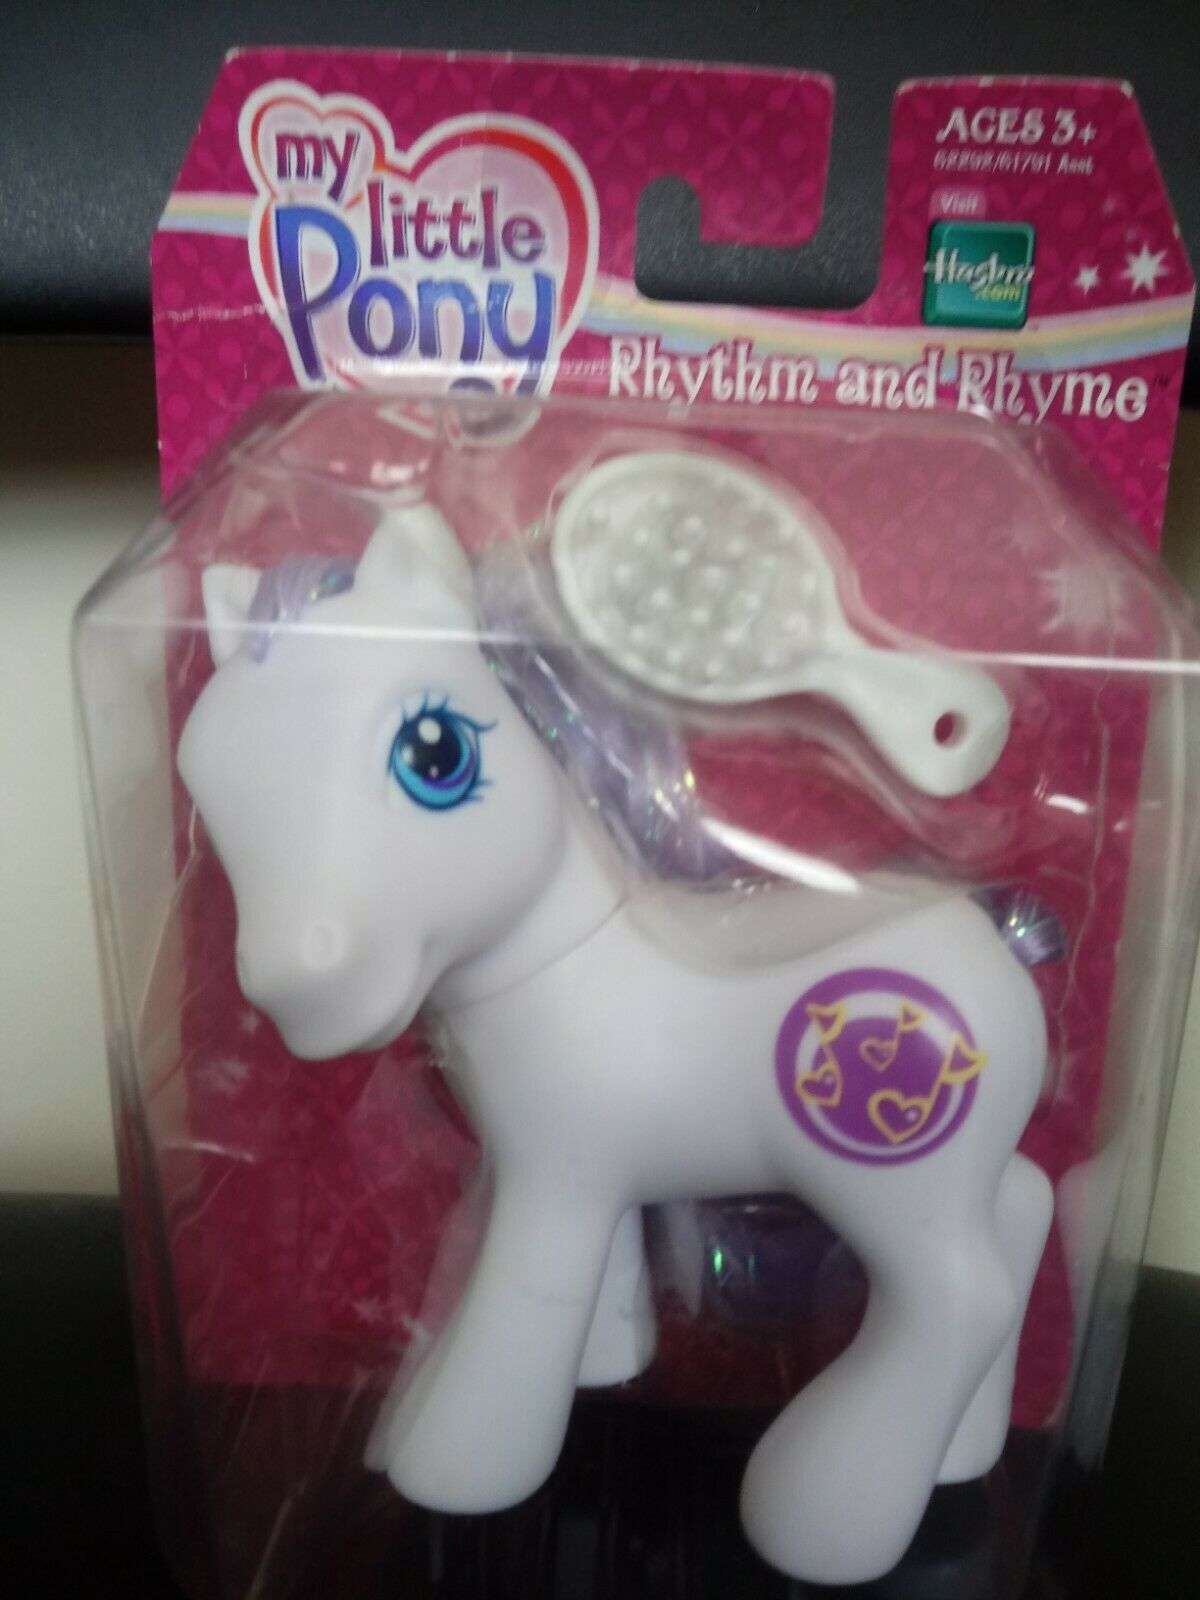 2005 Hasbro My Little Pony Rhythm And Rhyme Pony Never Removed From Box